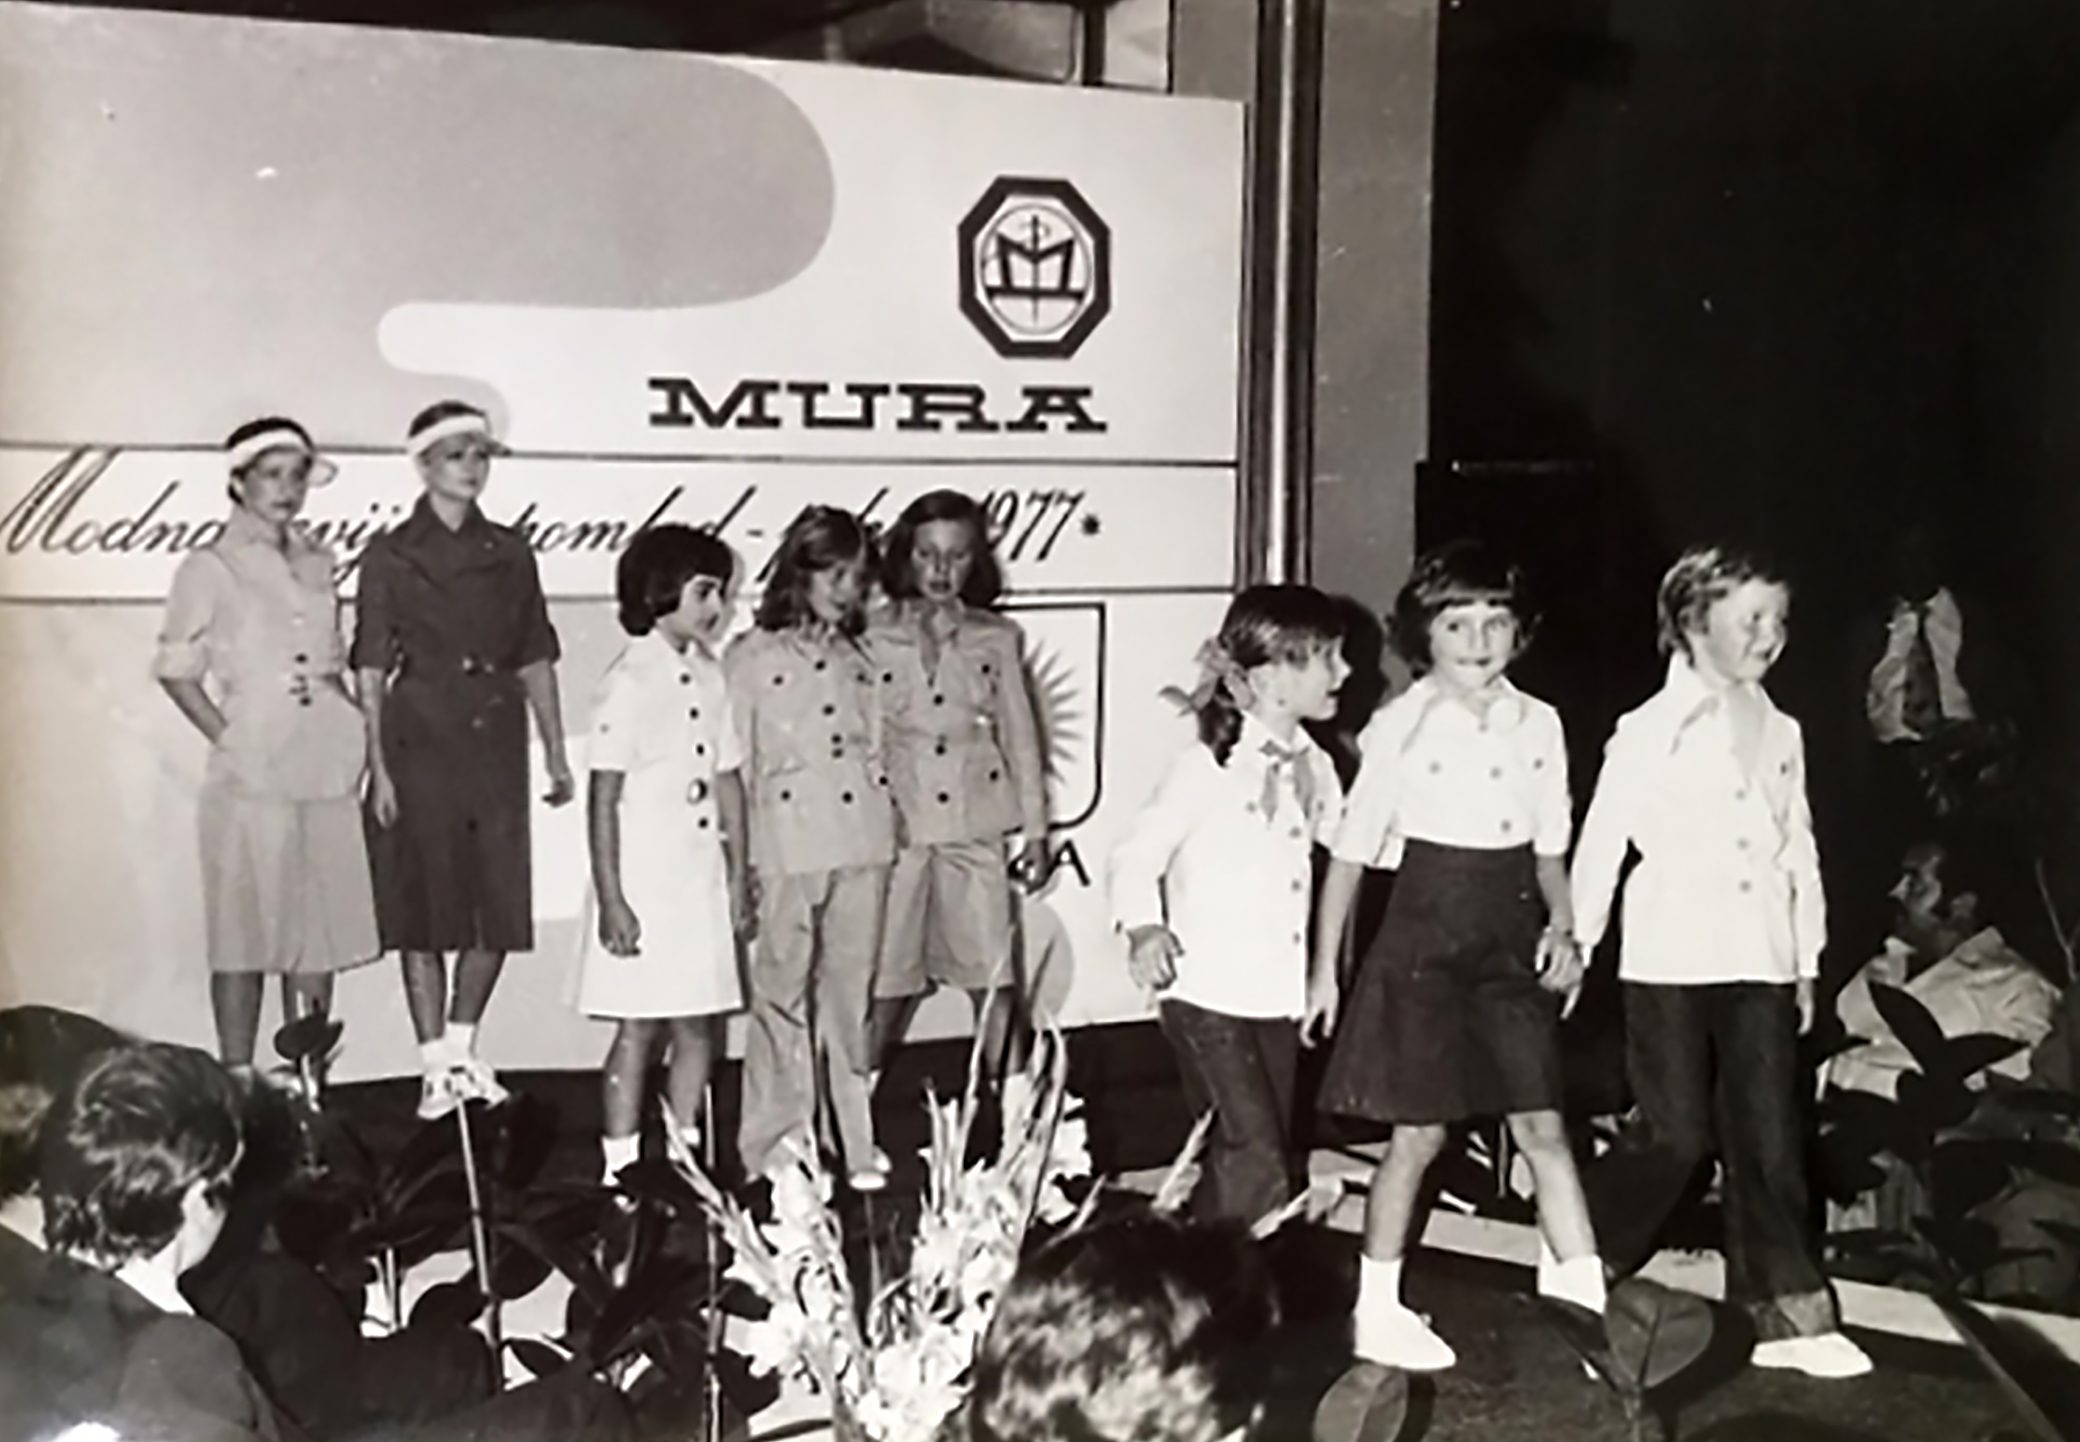 This picture provided by courtesy of Nena Bedek and taken in 1977 in Radenci, northeastern Slovenia, shows Slovenian-American former model and Donald Trump's wife Melania Trump (born Melanija Knavs)(2nd R) as a child, together with Nena Bedek (R), attending a fashion review of Jutranjka, the textile company where her mother used to work. Because of Melania Trump's husband success so far in the Republican race for the White House candidacy, foreign journalists and tourists have become a frequent sight in her birth region, set in rolling hills 100 kilometres (60 miles) from the capital Ljubljana. / AFP PHOTO / Nena Bedek / STR